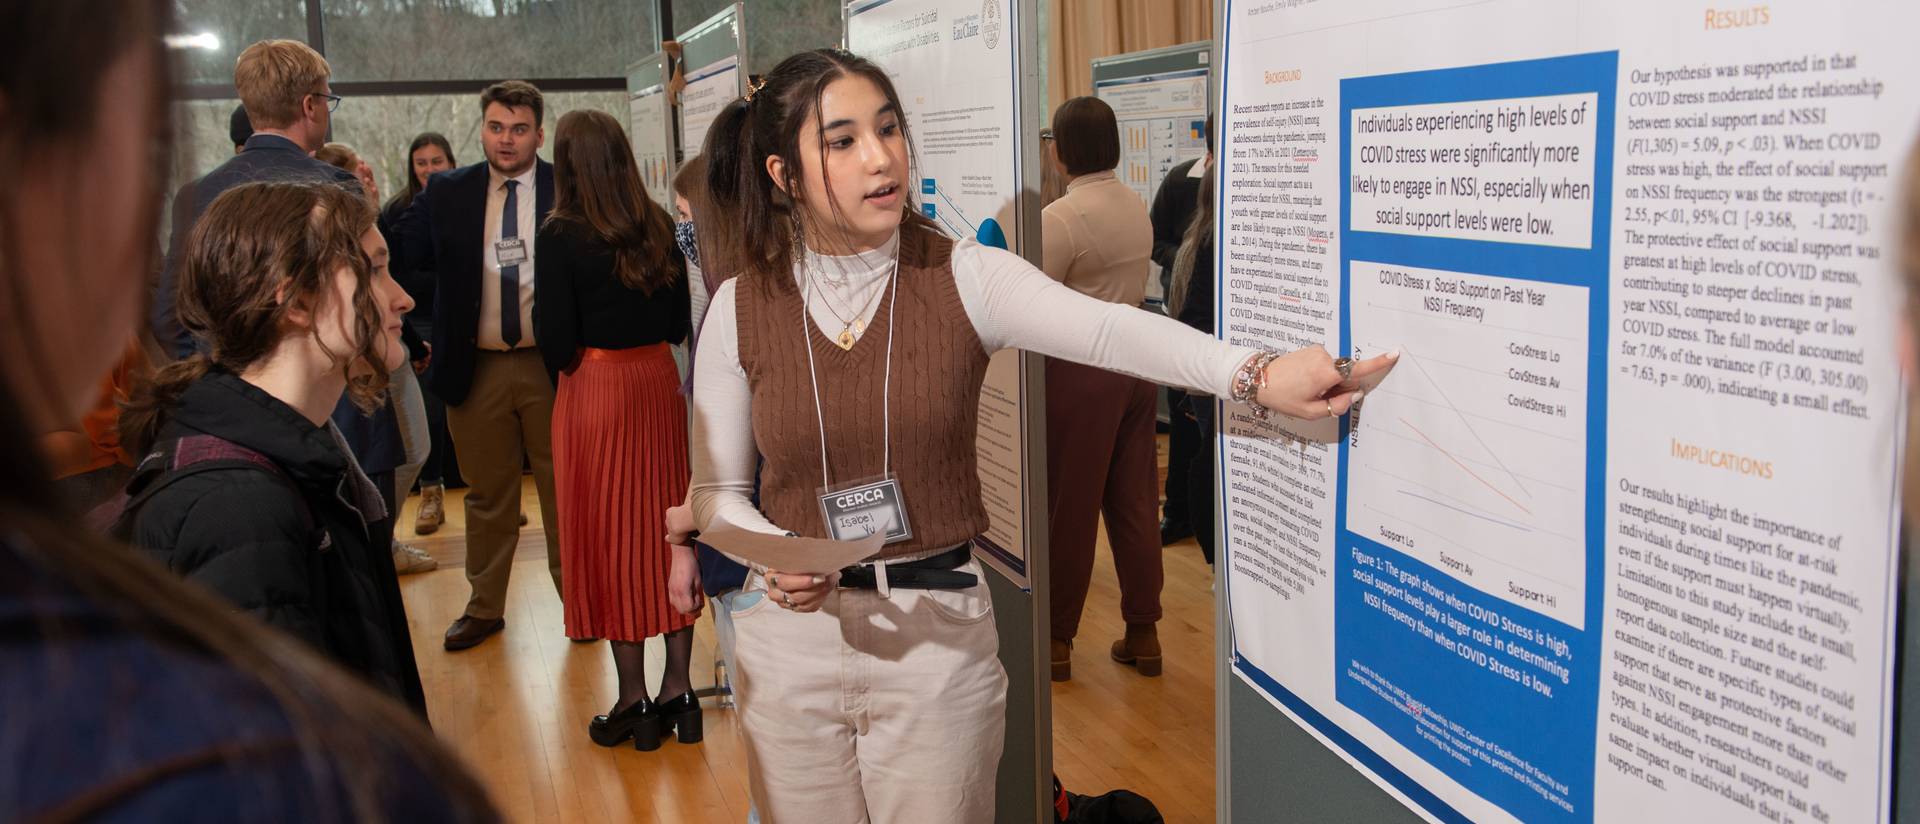 Student points to a research poster while presenting during a session